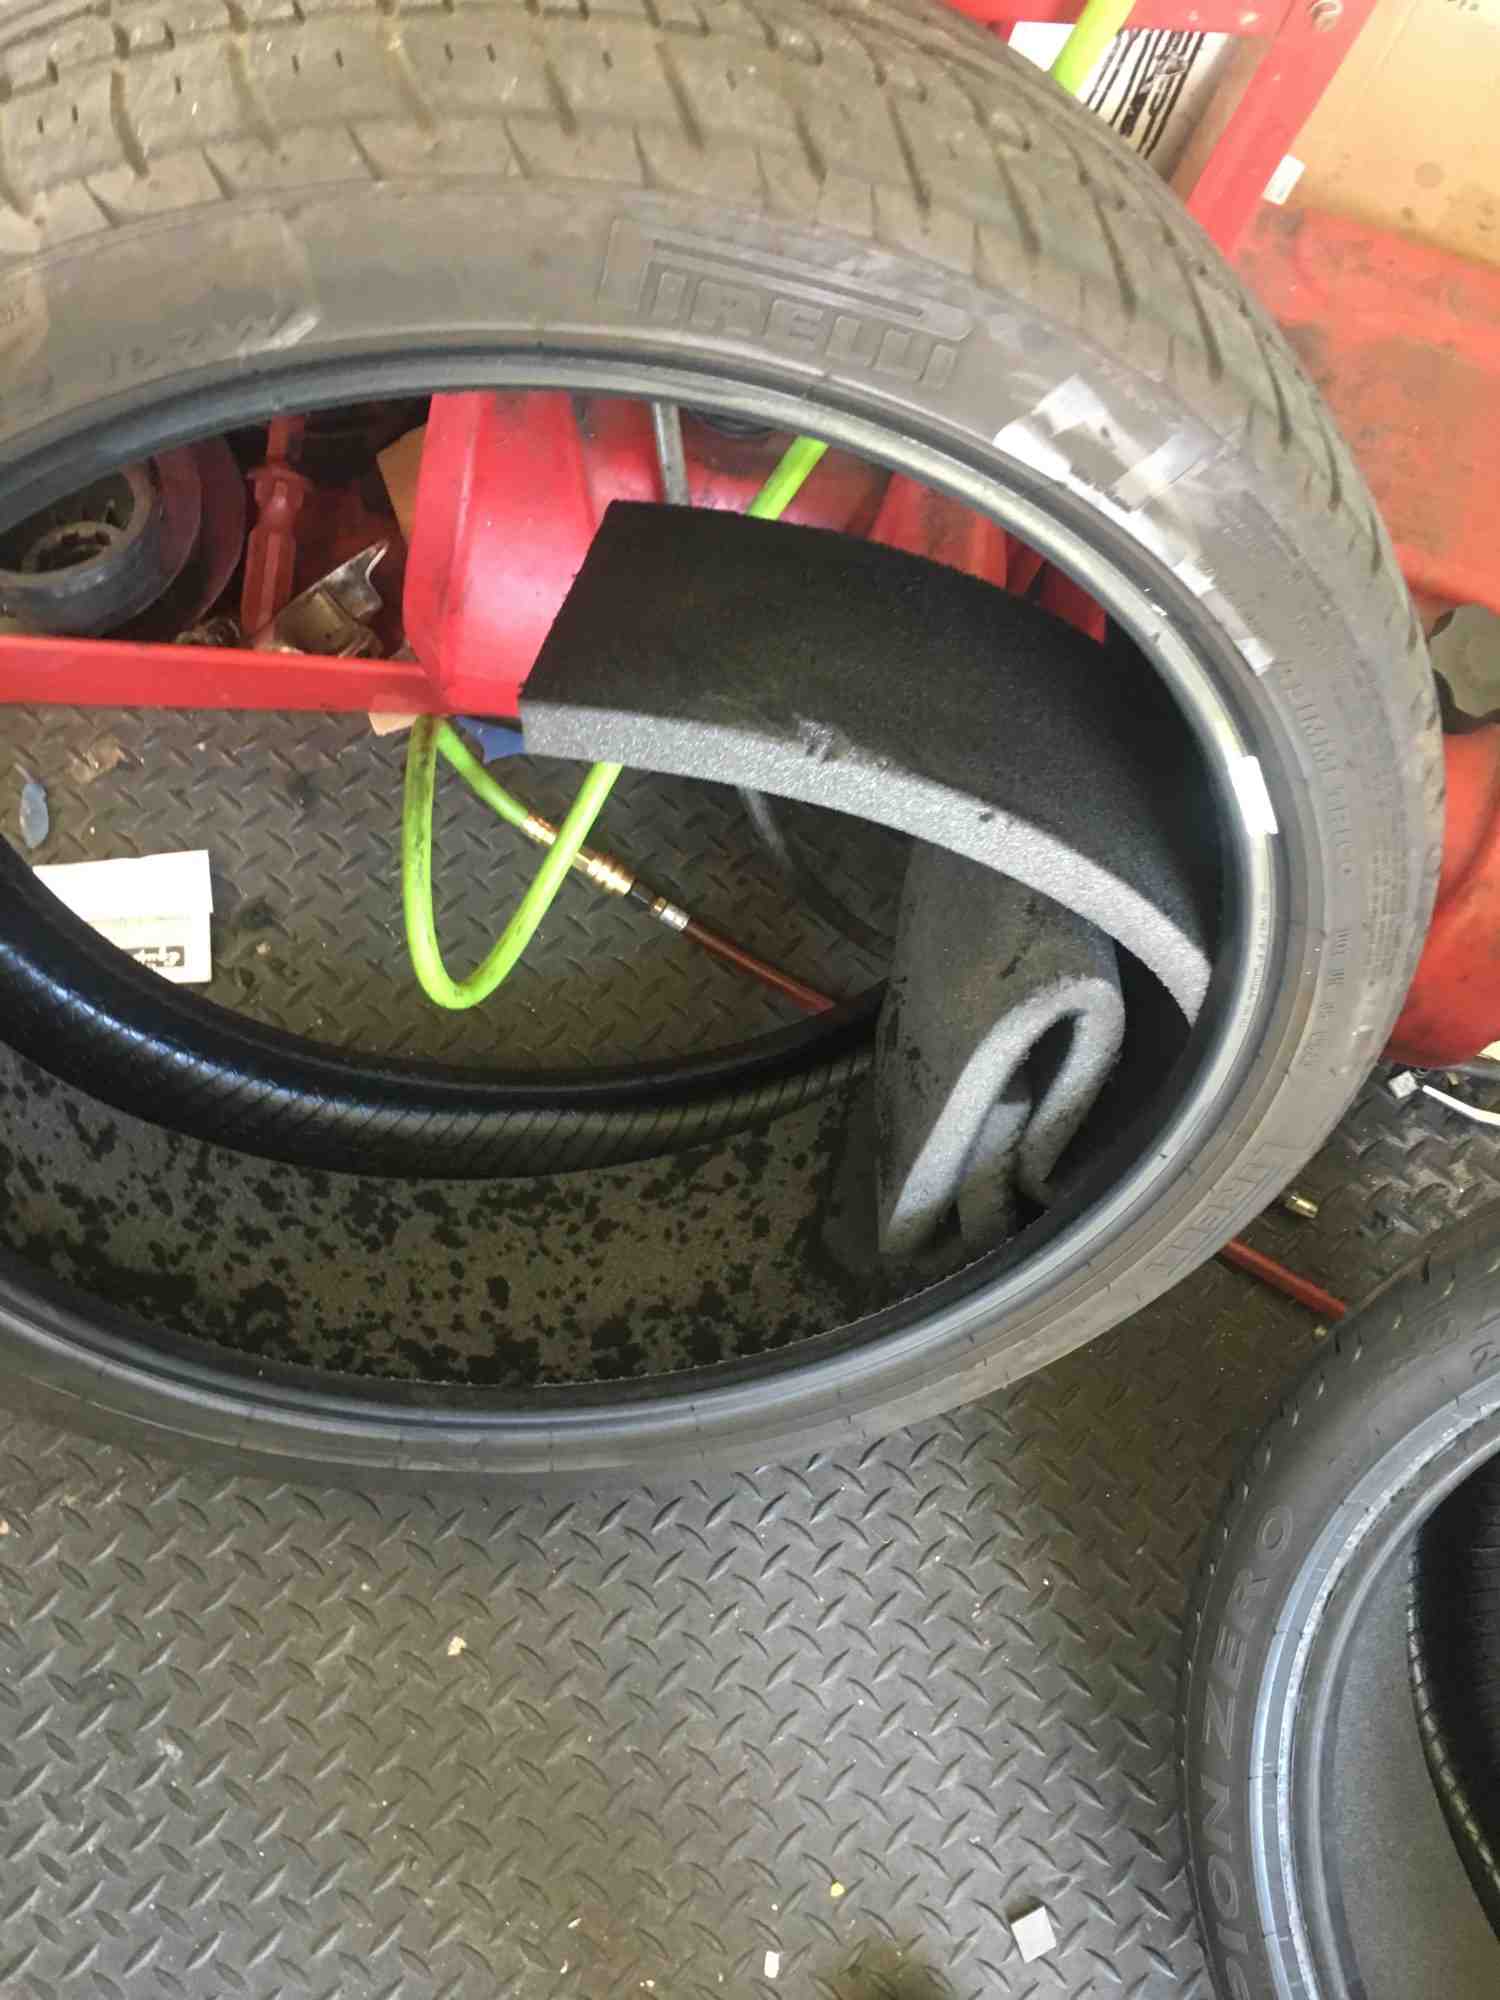 Why is there foam inside a Tesla tire?